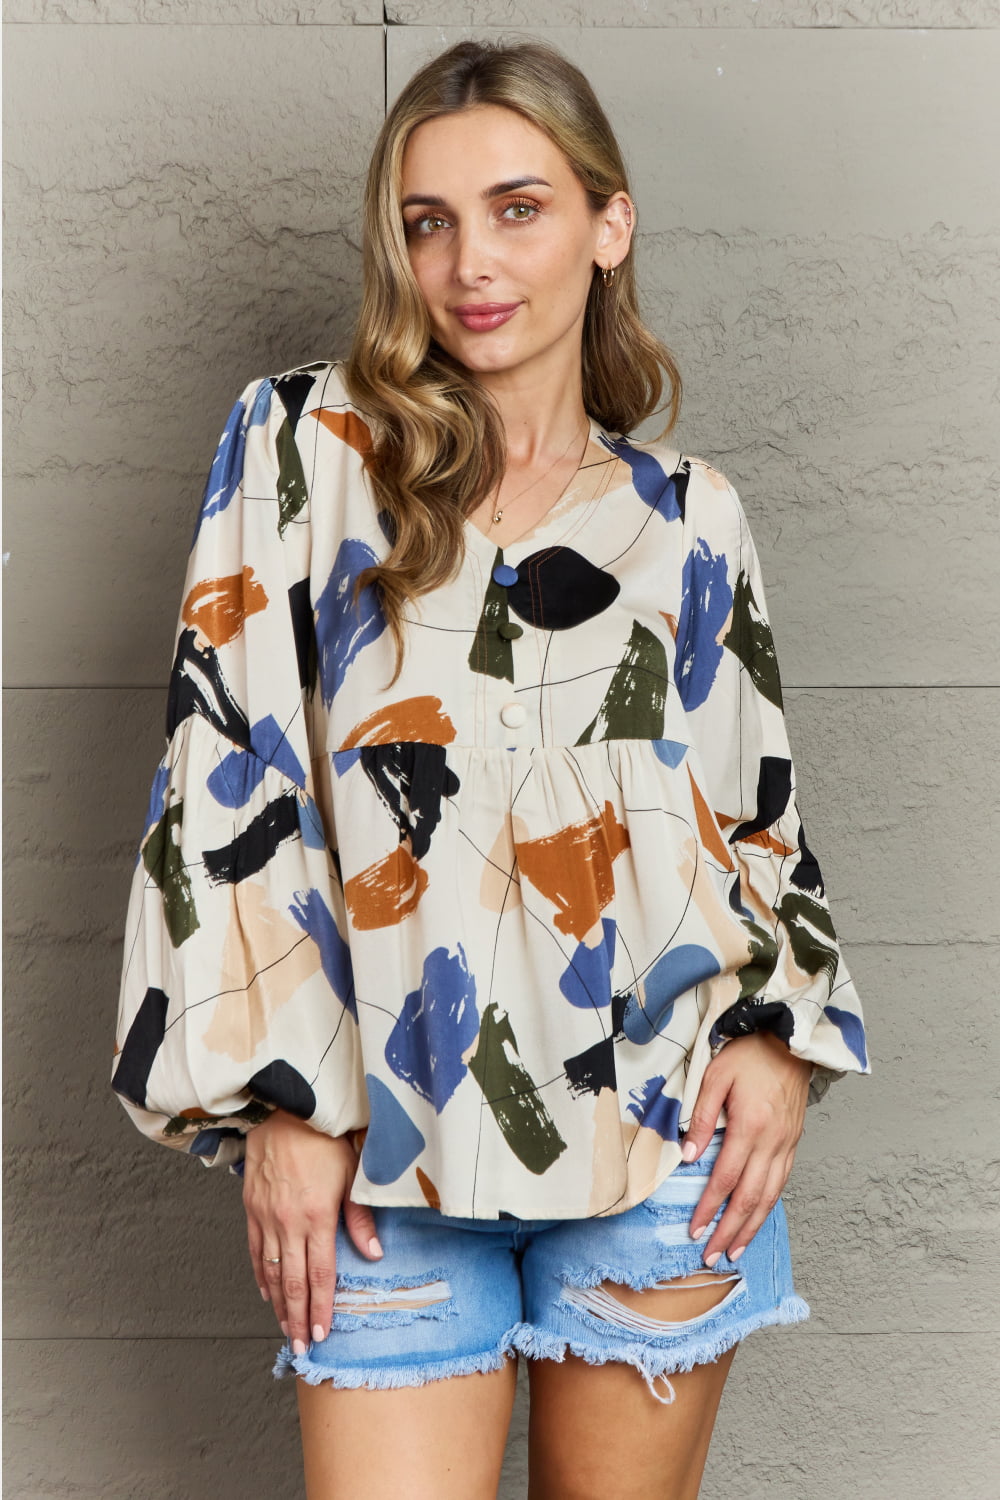 Hailey & Co Wishful Thinking Multi Colored Printed Blouse Trendsi